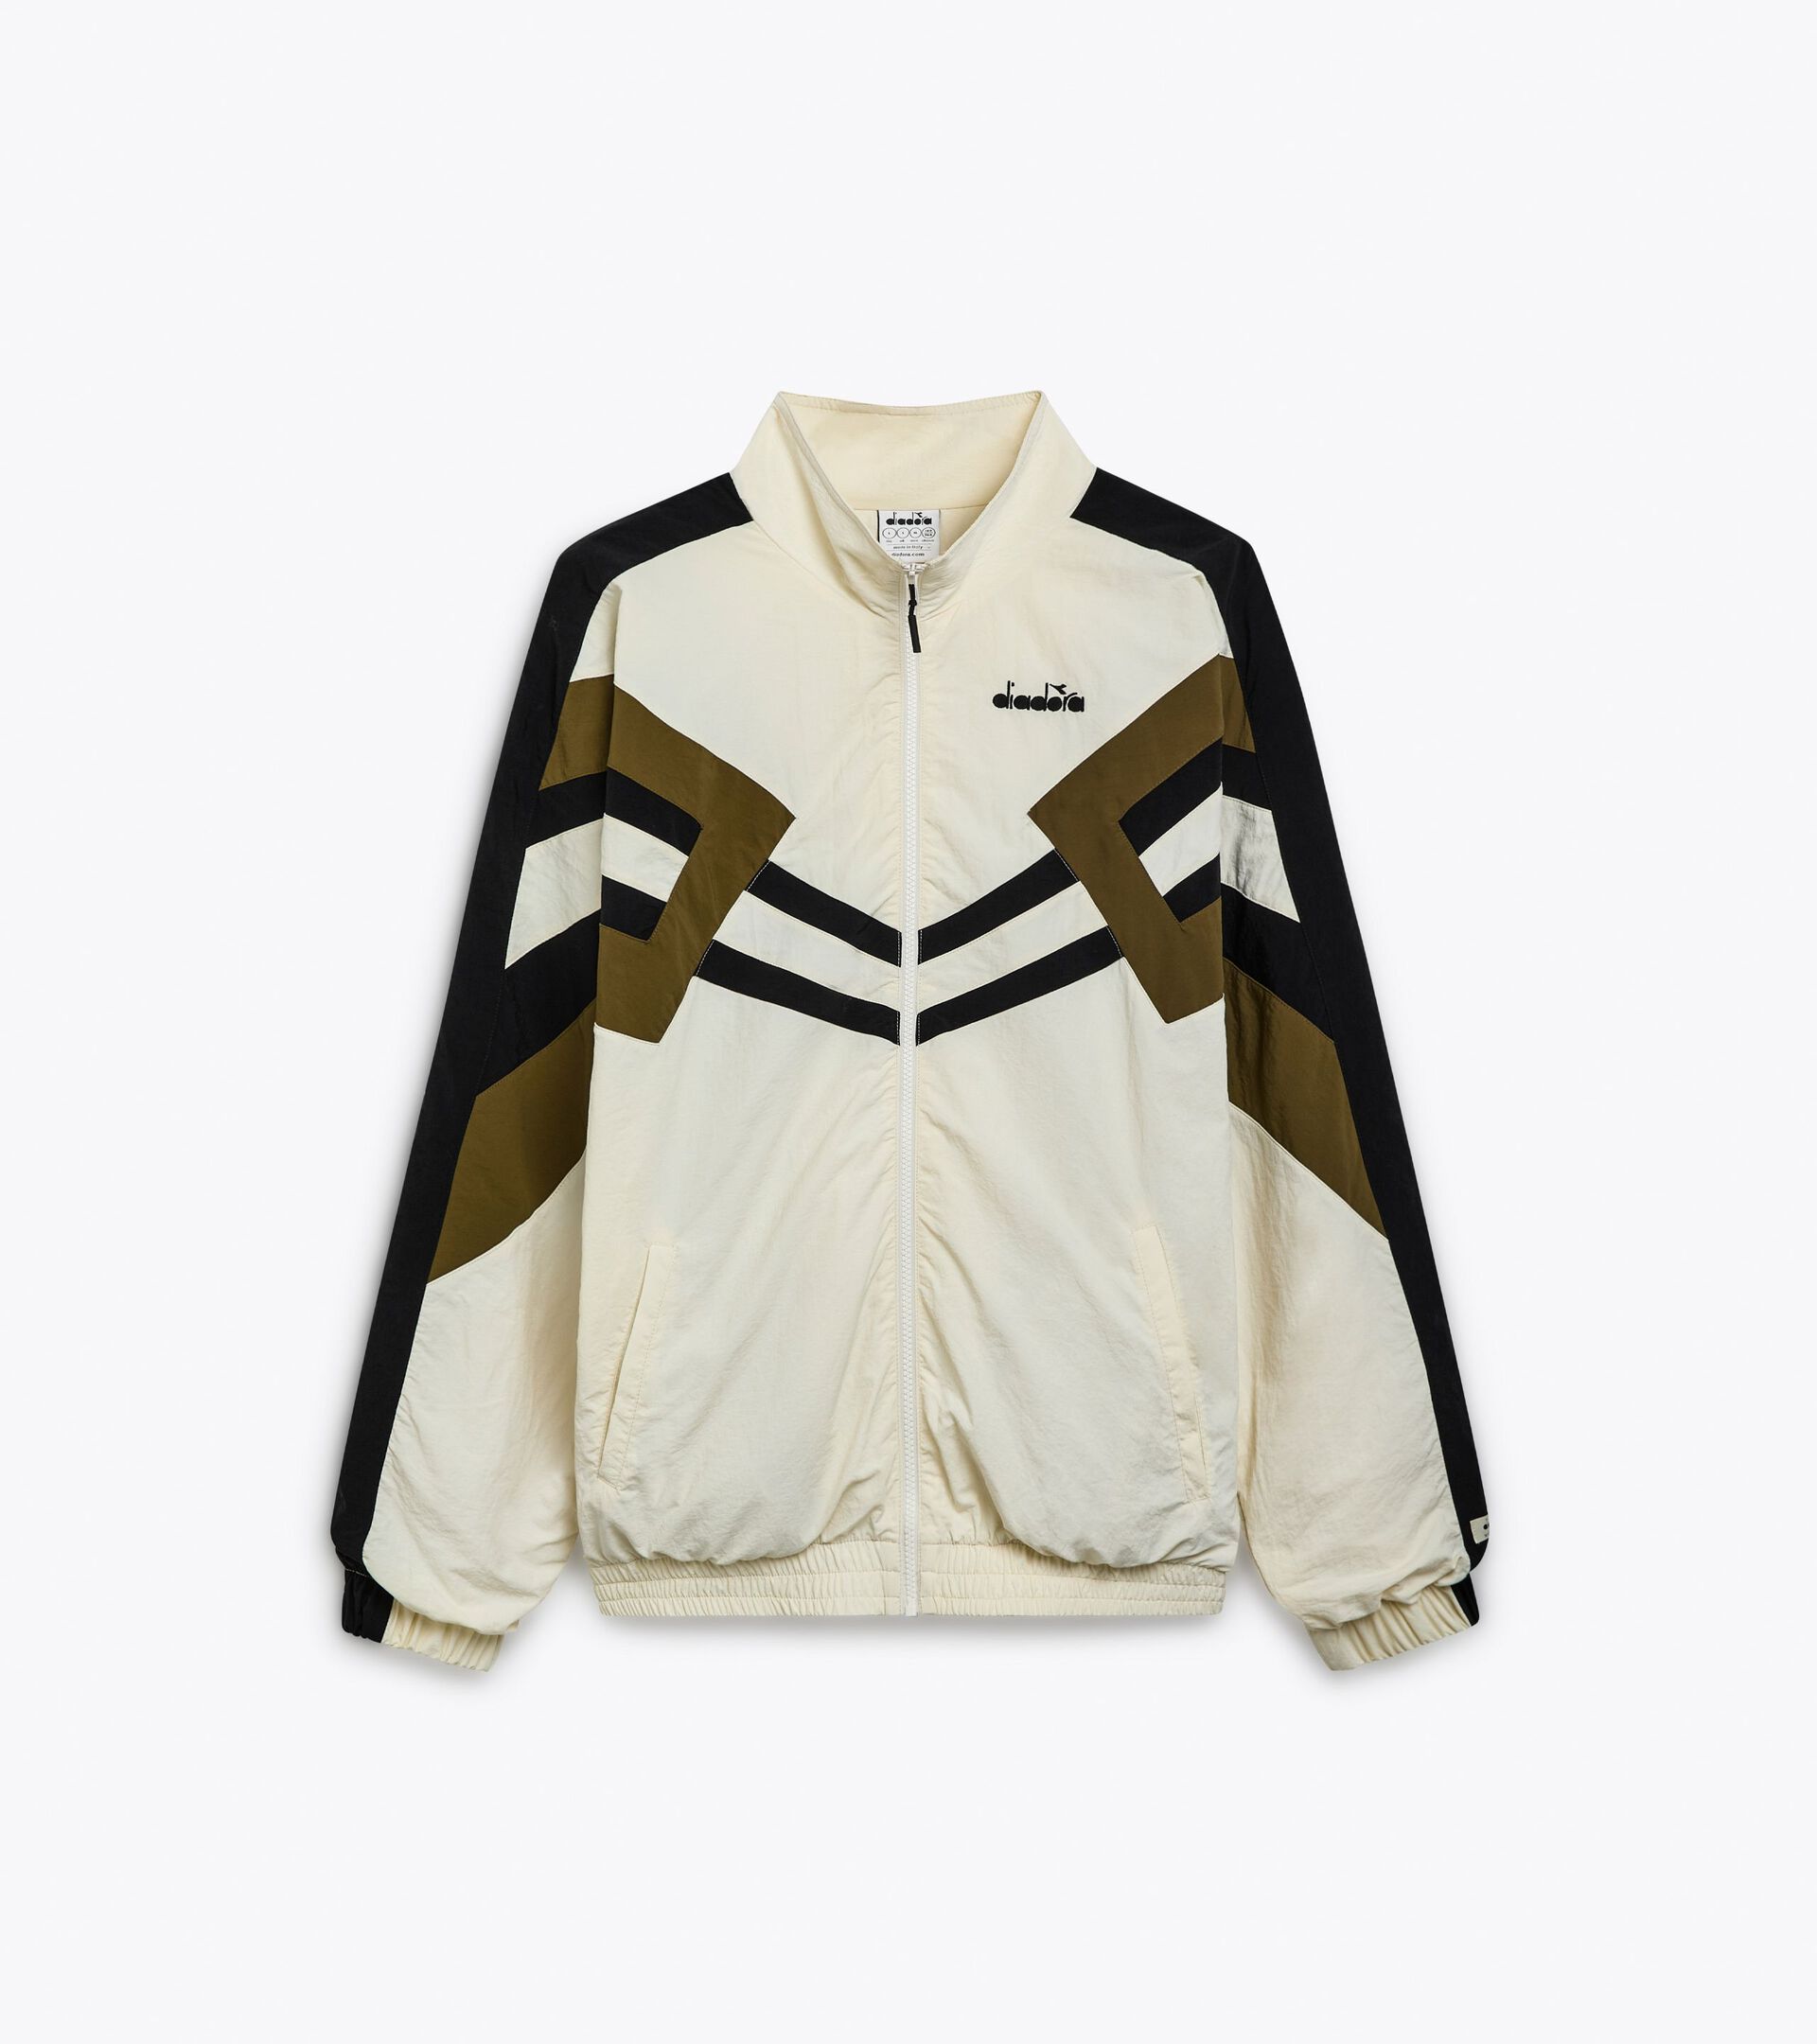 Track Jacket - Made in Italy - Genre neutre TRACK JACKET LEGACY BLANCHE MURMURE - Diadora